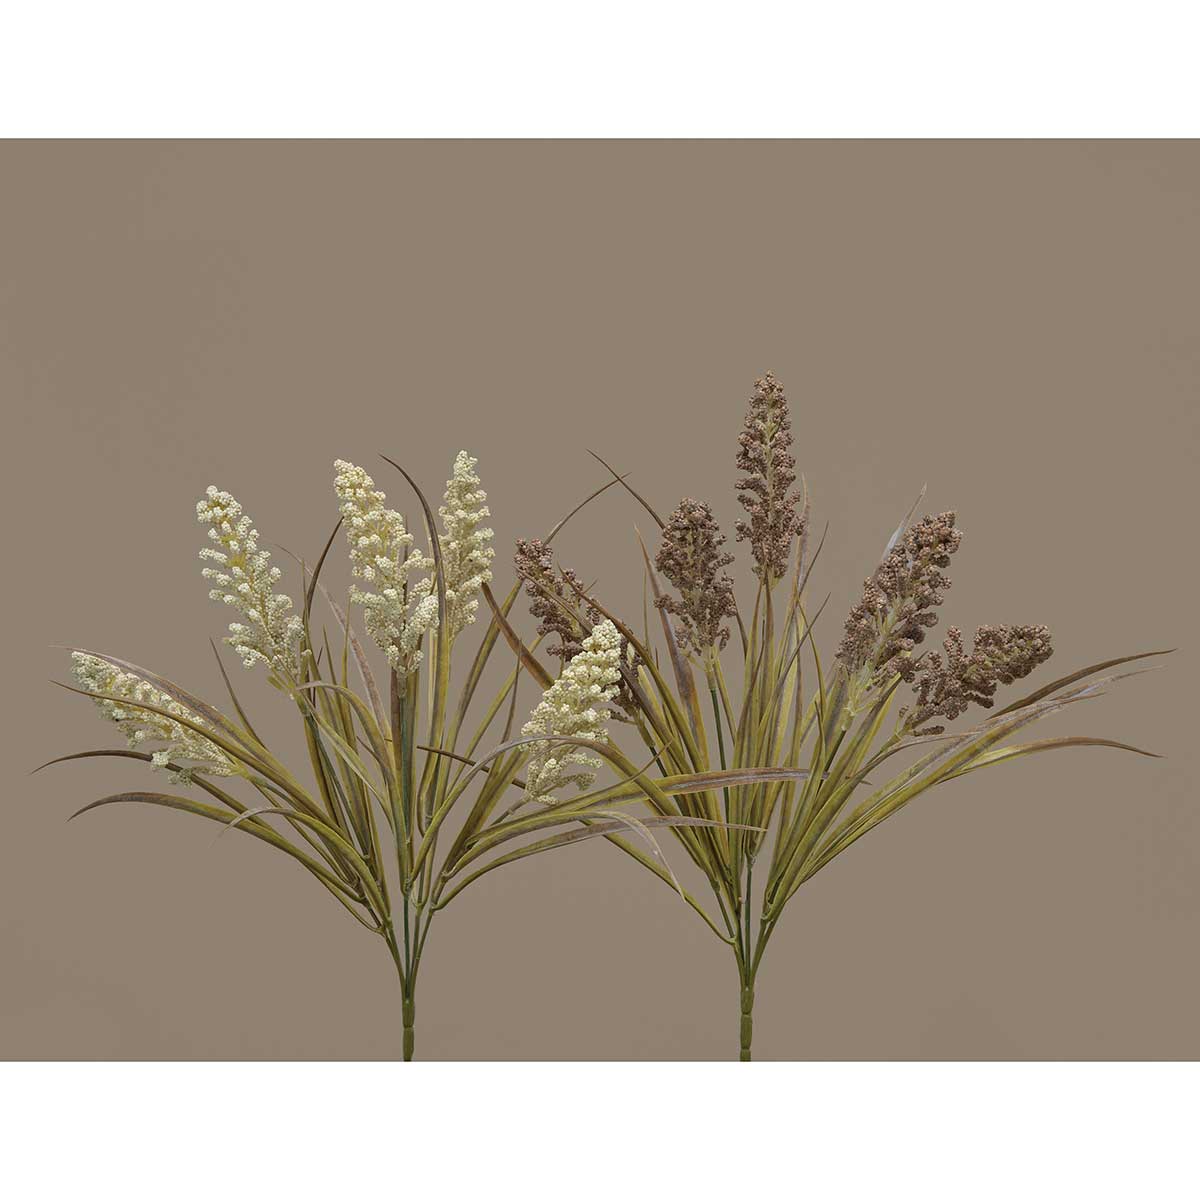 SPRAY SORGHUM GRASS BROWN 10IN X 14IN PLASTIC